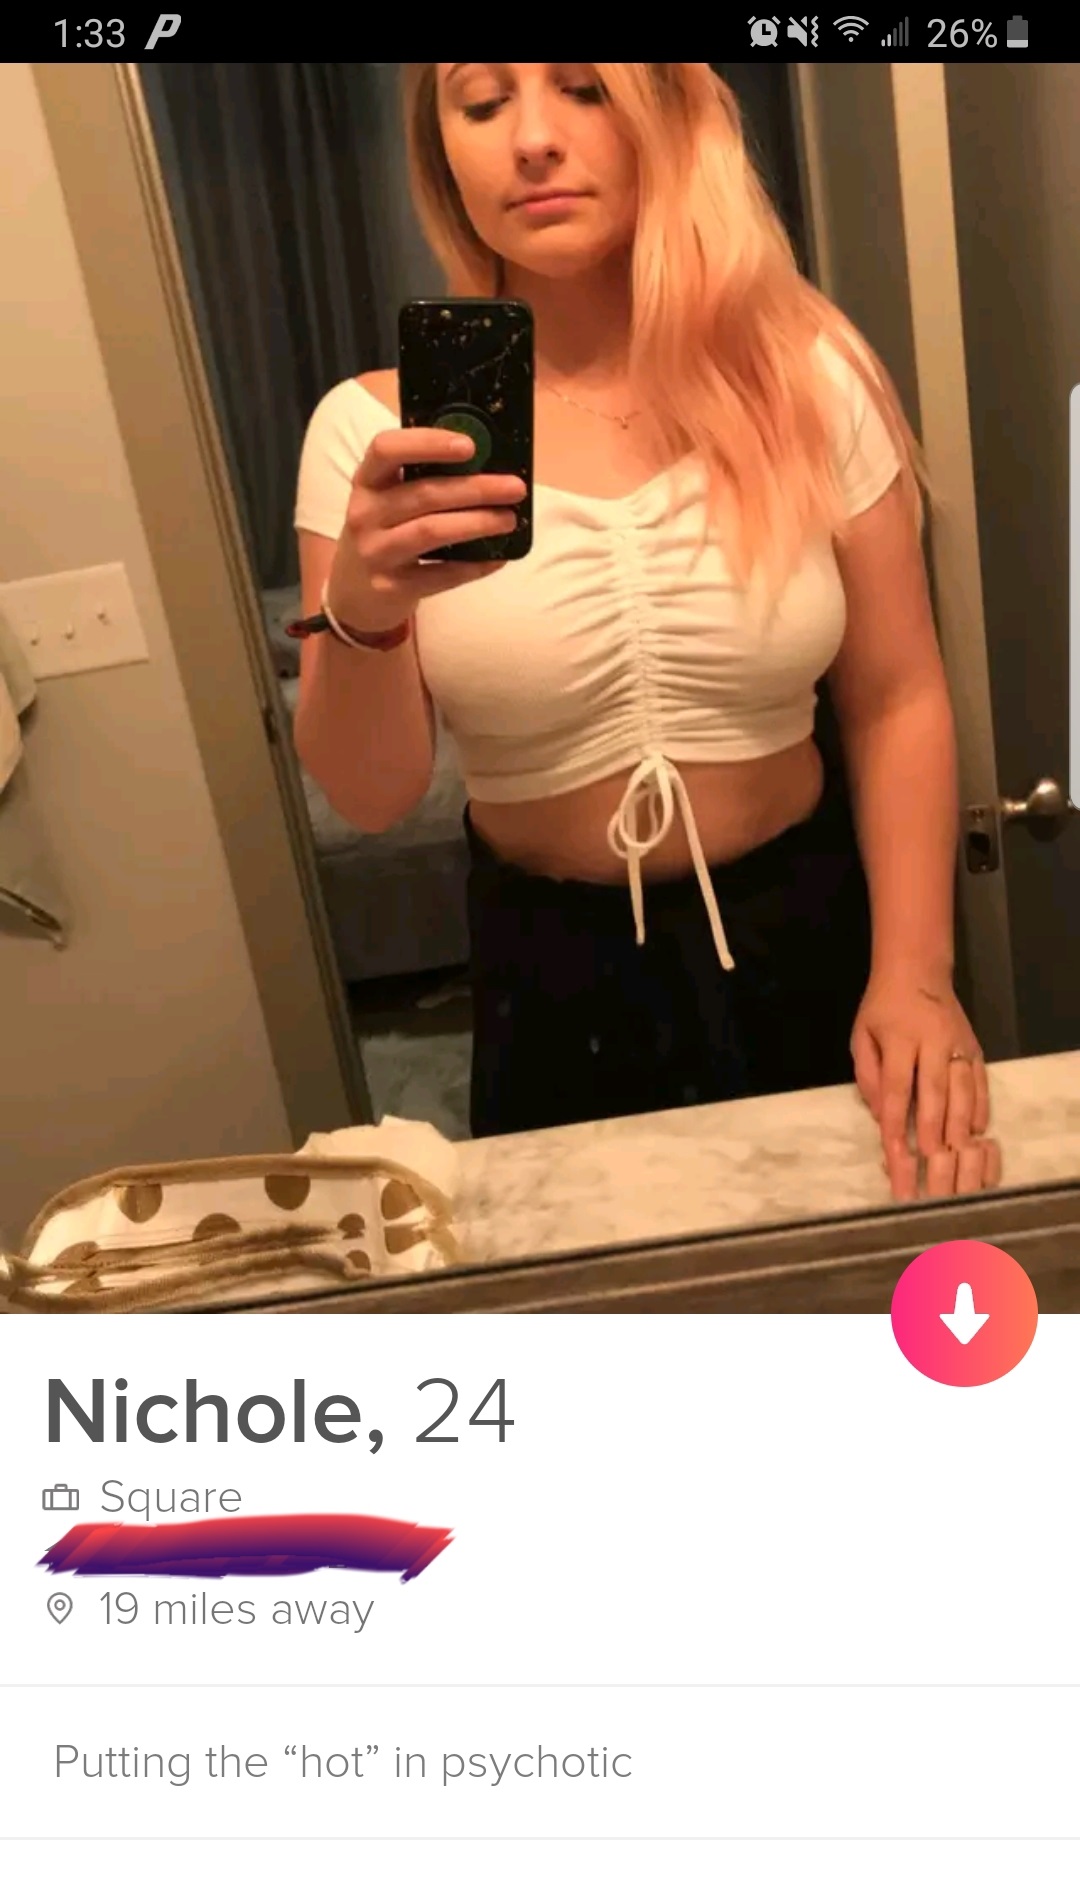 P Dne 26% Nichole, 24 I Square 19 miles away Putting the hot in psychotic